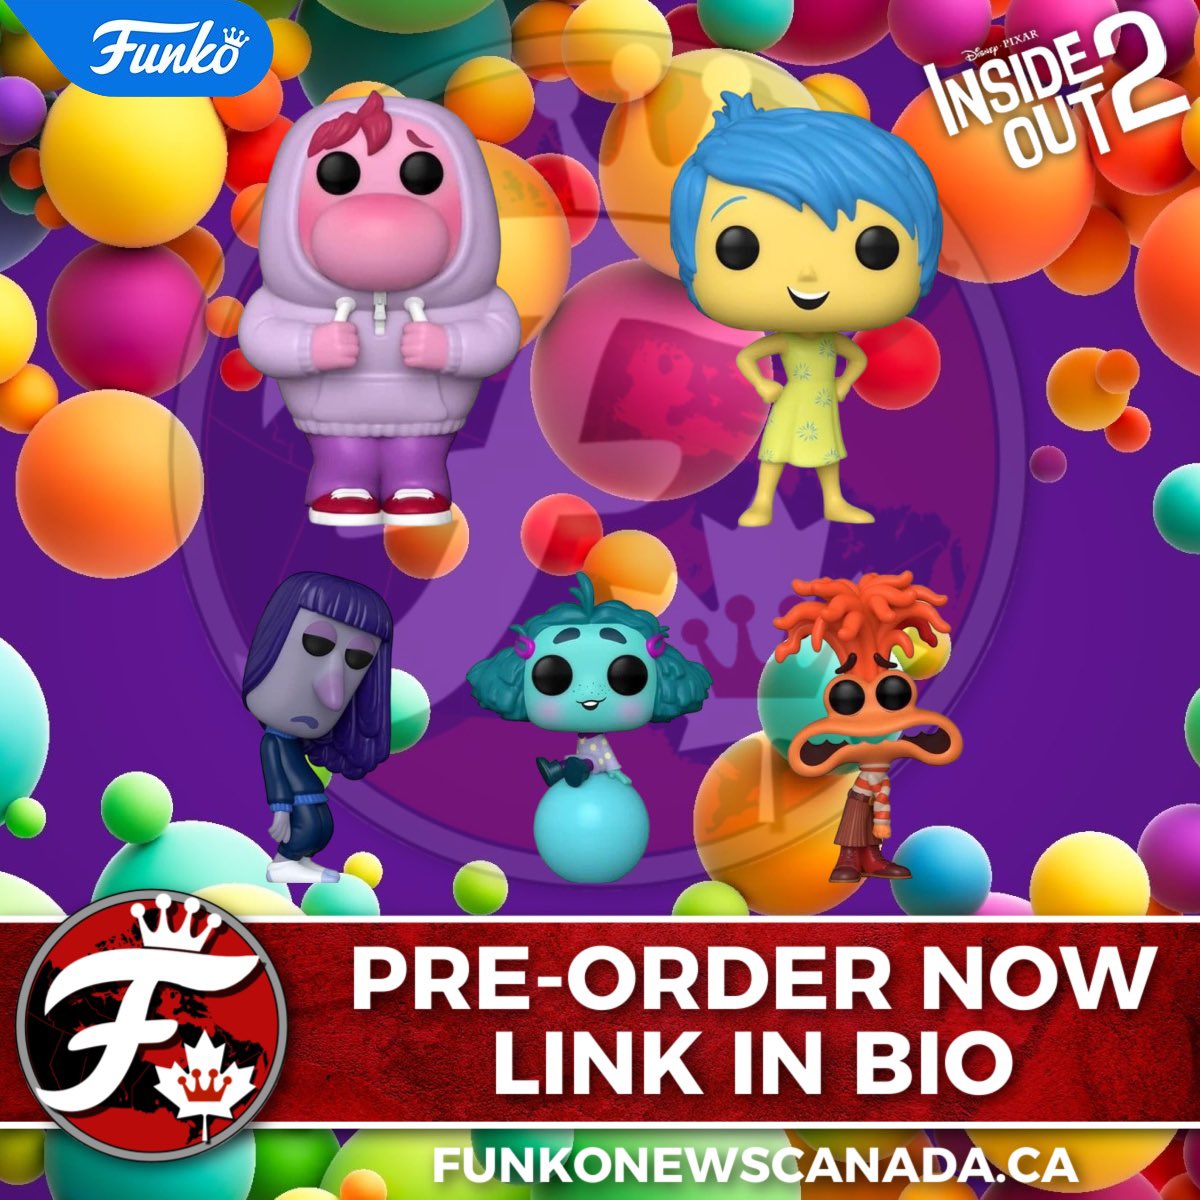 Coming Soon to Your Local Funko Retailer:

Funko Pop! Disney: Pixar’s Inside Out 2

Amazon CA:
amzn.to/3JHktpv

Amazon US:
amzn.to/3wee3v6

Note: Pictures will update once loaded 
 
#nerdlife #vinylfigures #funkocommunity #funkocollector #toycommunity